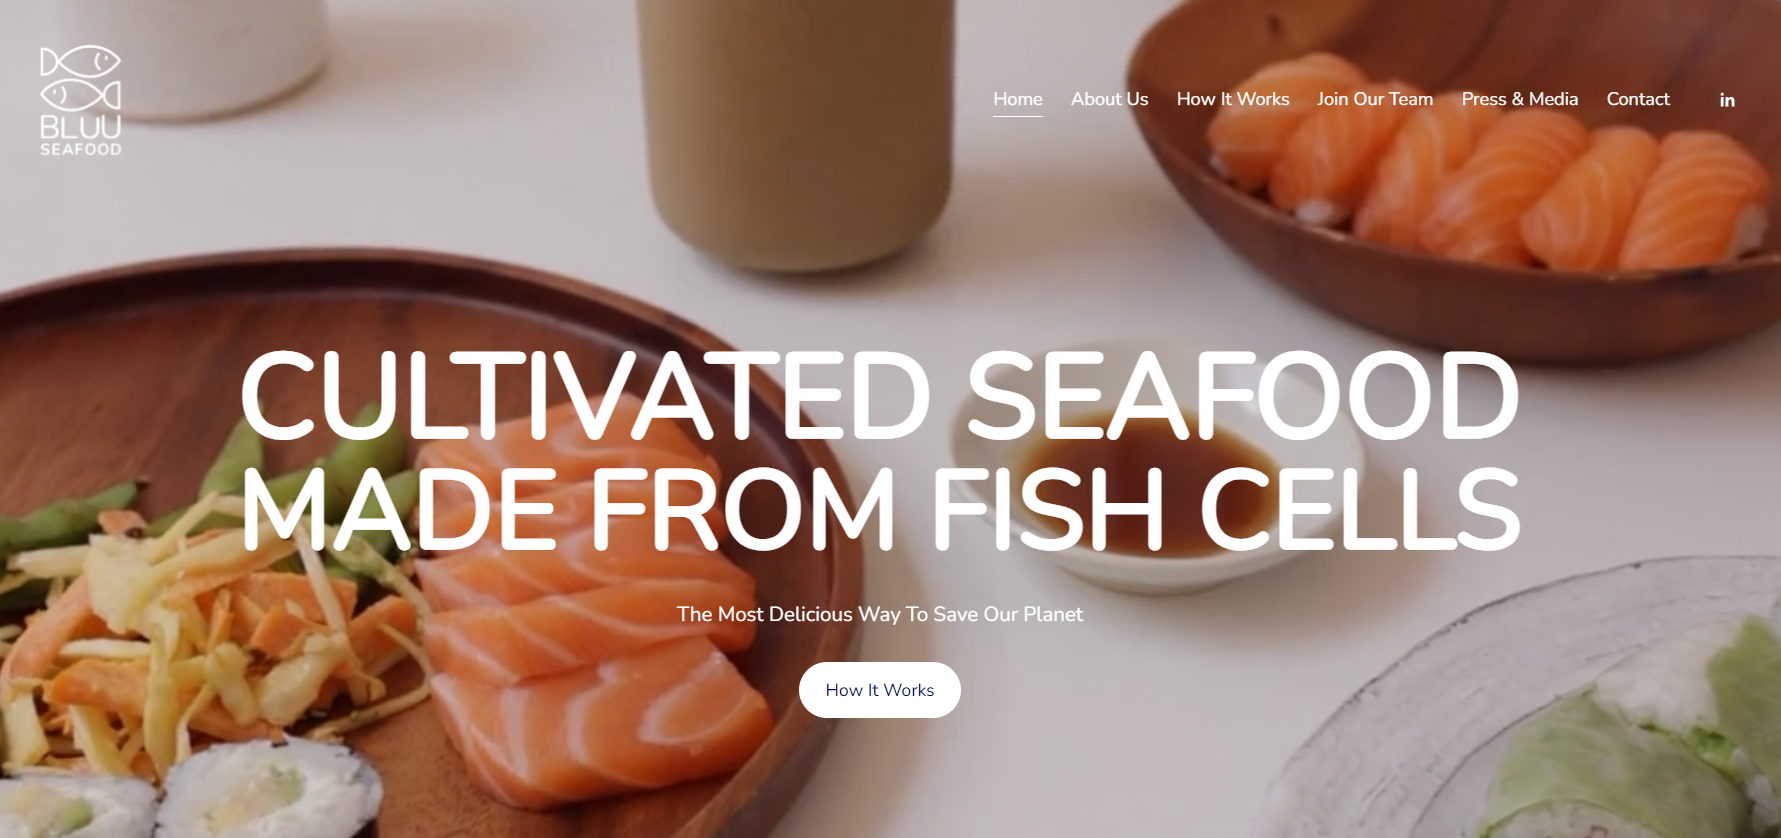 BLUU Seafood has recently raised an impressive $26M, offering solution to the destructive nature of current seafood production.